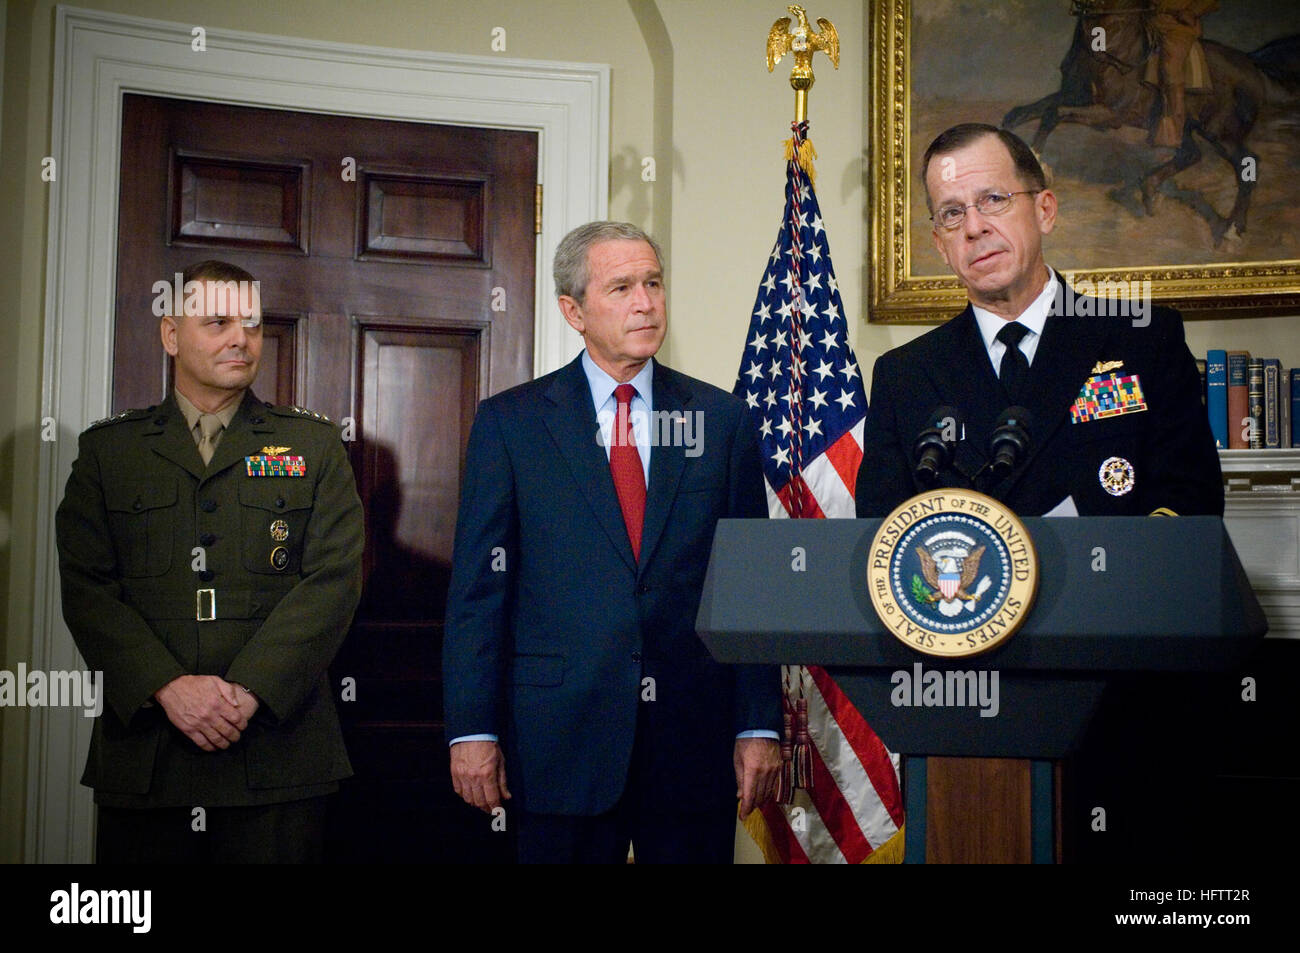 070628-N-0696M-152 WASHINGTON, D.C. (June 28, 2007) - Chief of Naval Operations (CNO) Adm. Mike Mullen speaks following his nomination by President George W. Bush as Chairman of the Joint Chiefs of Staff. Commander, United States Strategic Command, Gen. James E. Cartwright was nominated as Vice-Chairman of the Joint Chiefs of Staff. The nominations were held in the Roosevelt Room at the White House. U.S. Navy photo by Mass Communication Specialist 1st Class Chad J. McNeeley (RELEASED) US Navy 070628-N-0696M-152 Chief of Naval Operations (CNO) Adm. Mike Mullen speaks following his nomination by Stock Photo